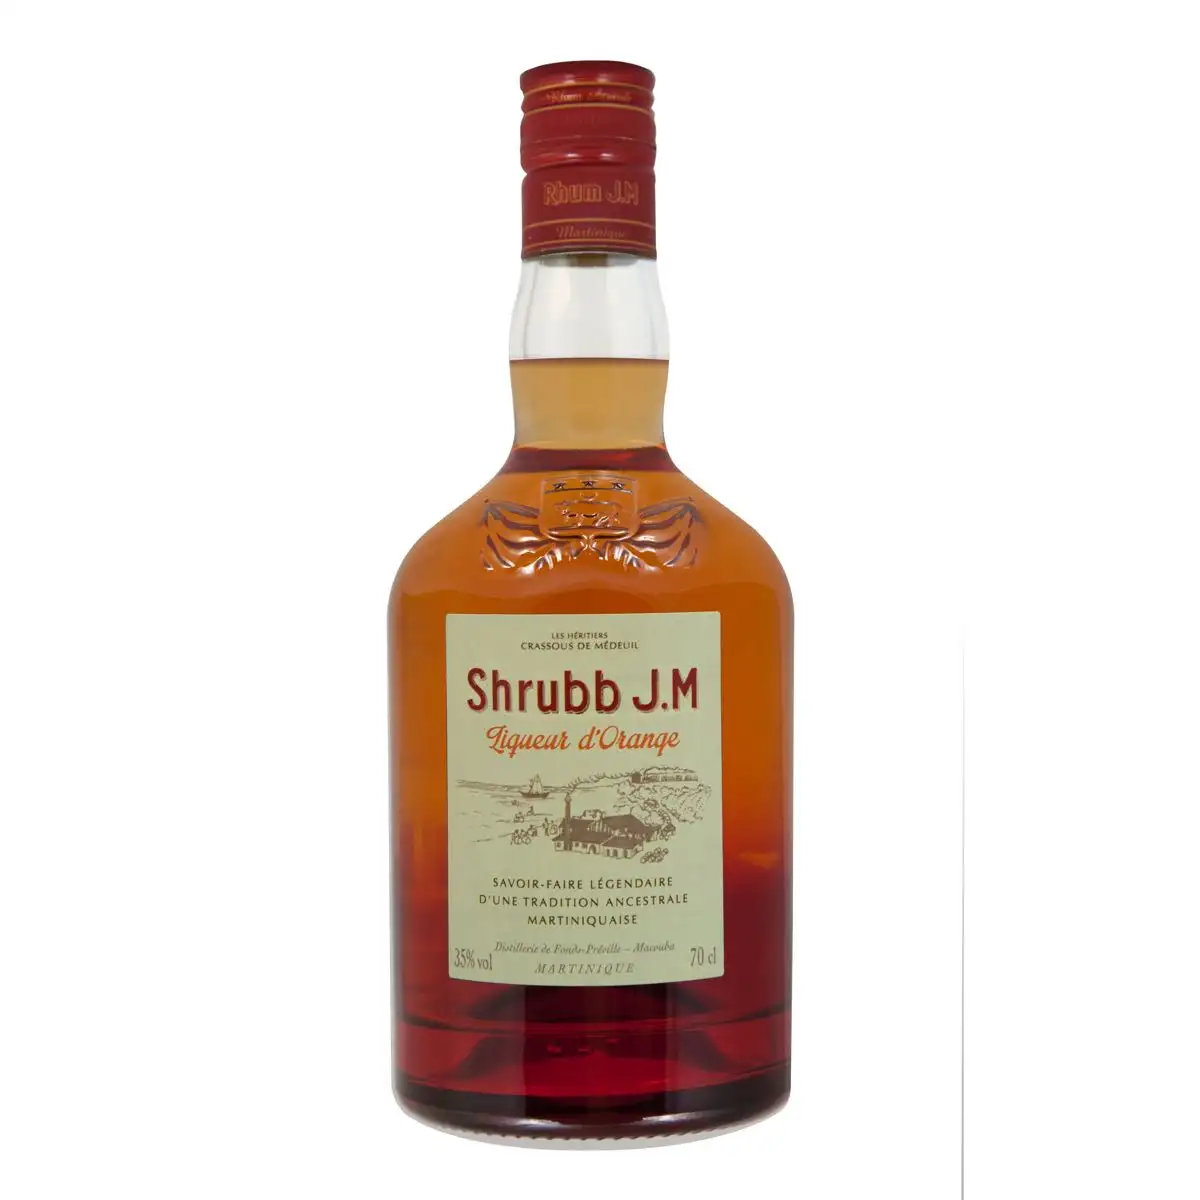 Image of the front of the bottle of the rum Shrubb J.M